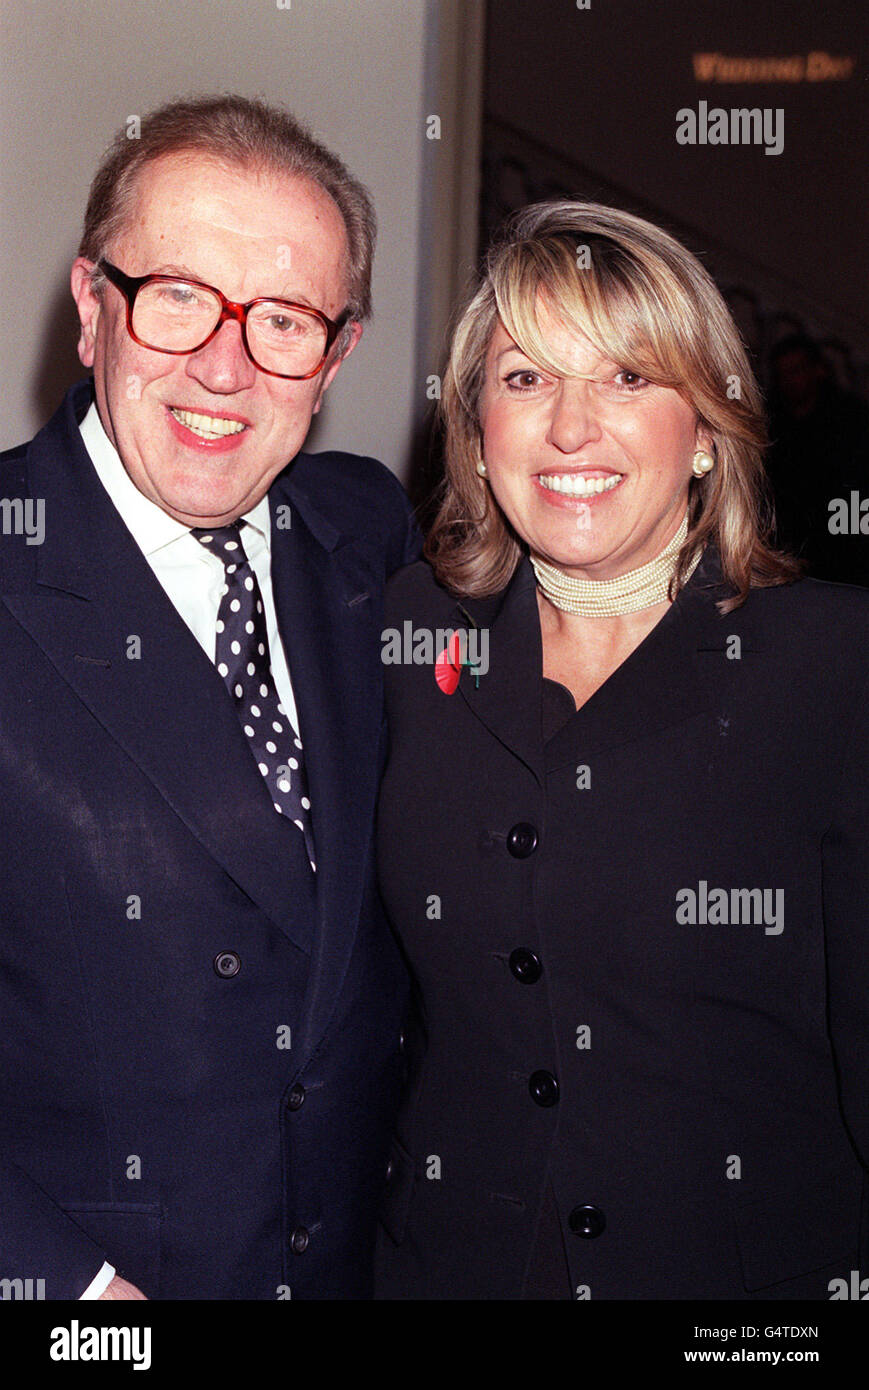 Eva Pollard with television presenter Sir David Frost at The Undercroft Banqueting House, Whitehall for the launch of her new Wedding Day magazine. Stock Photo